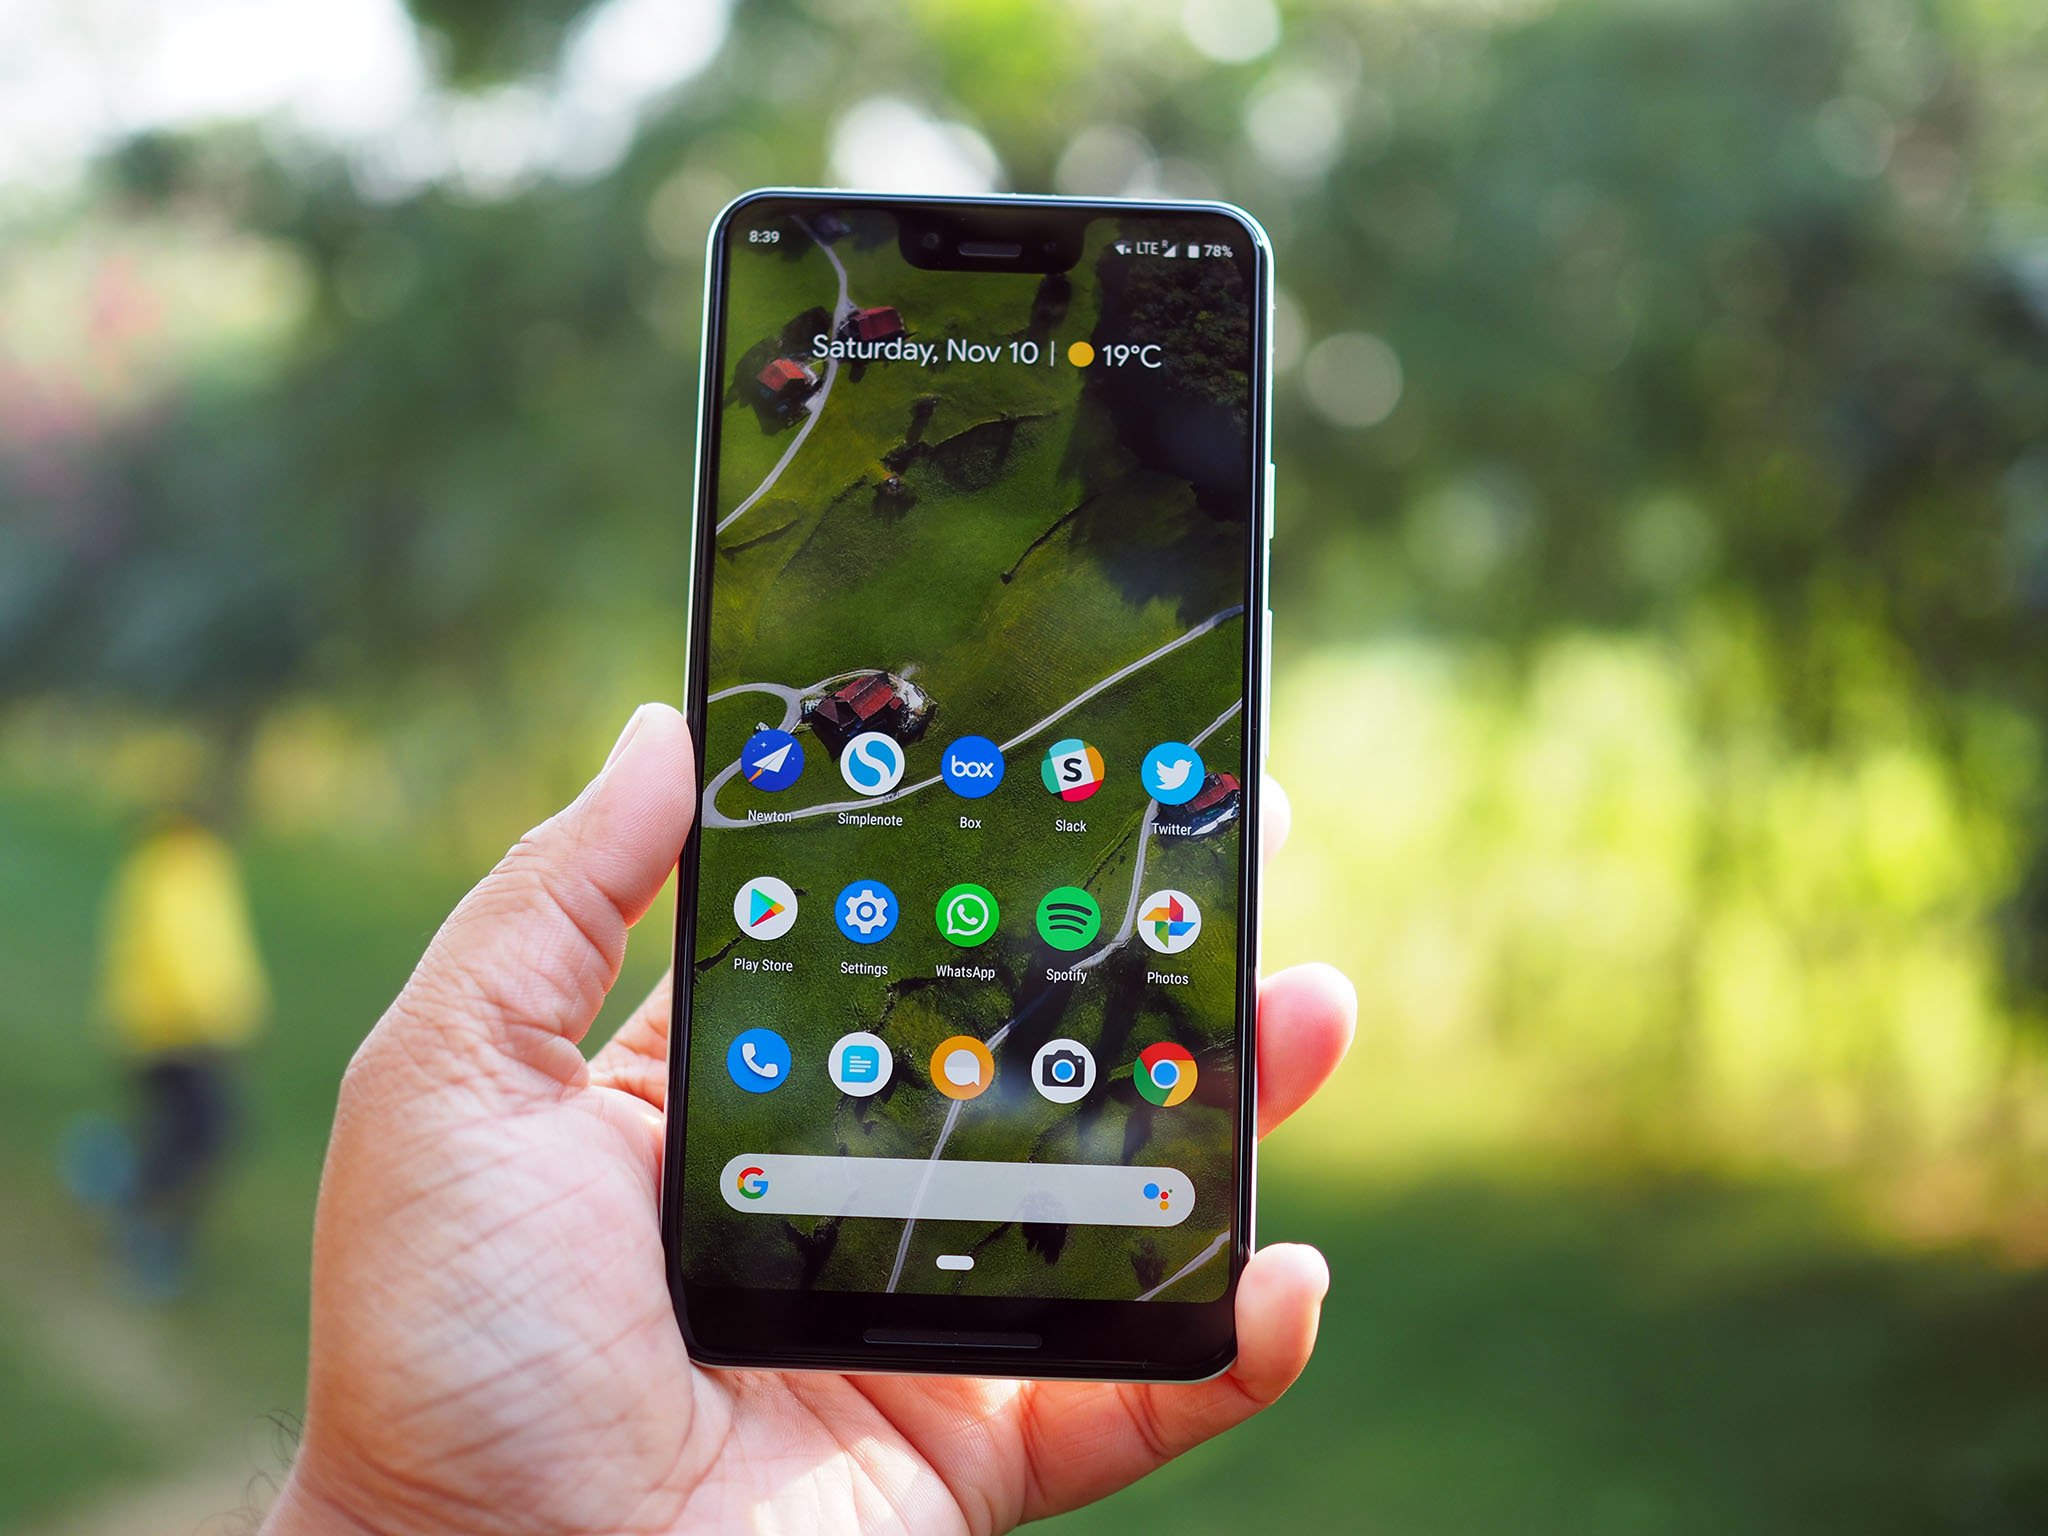 The best tips and tricks to get you all the Pixel 3 and XL features